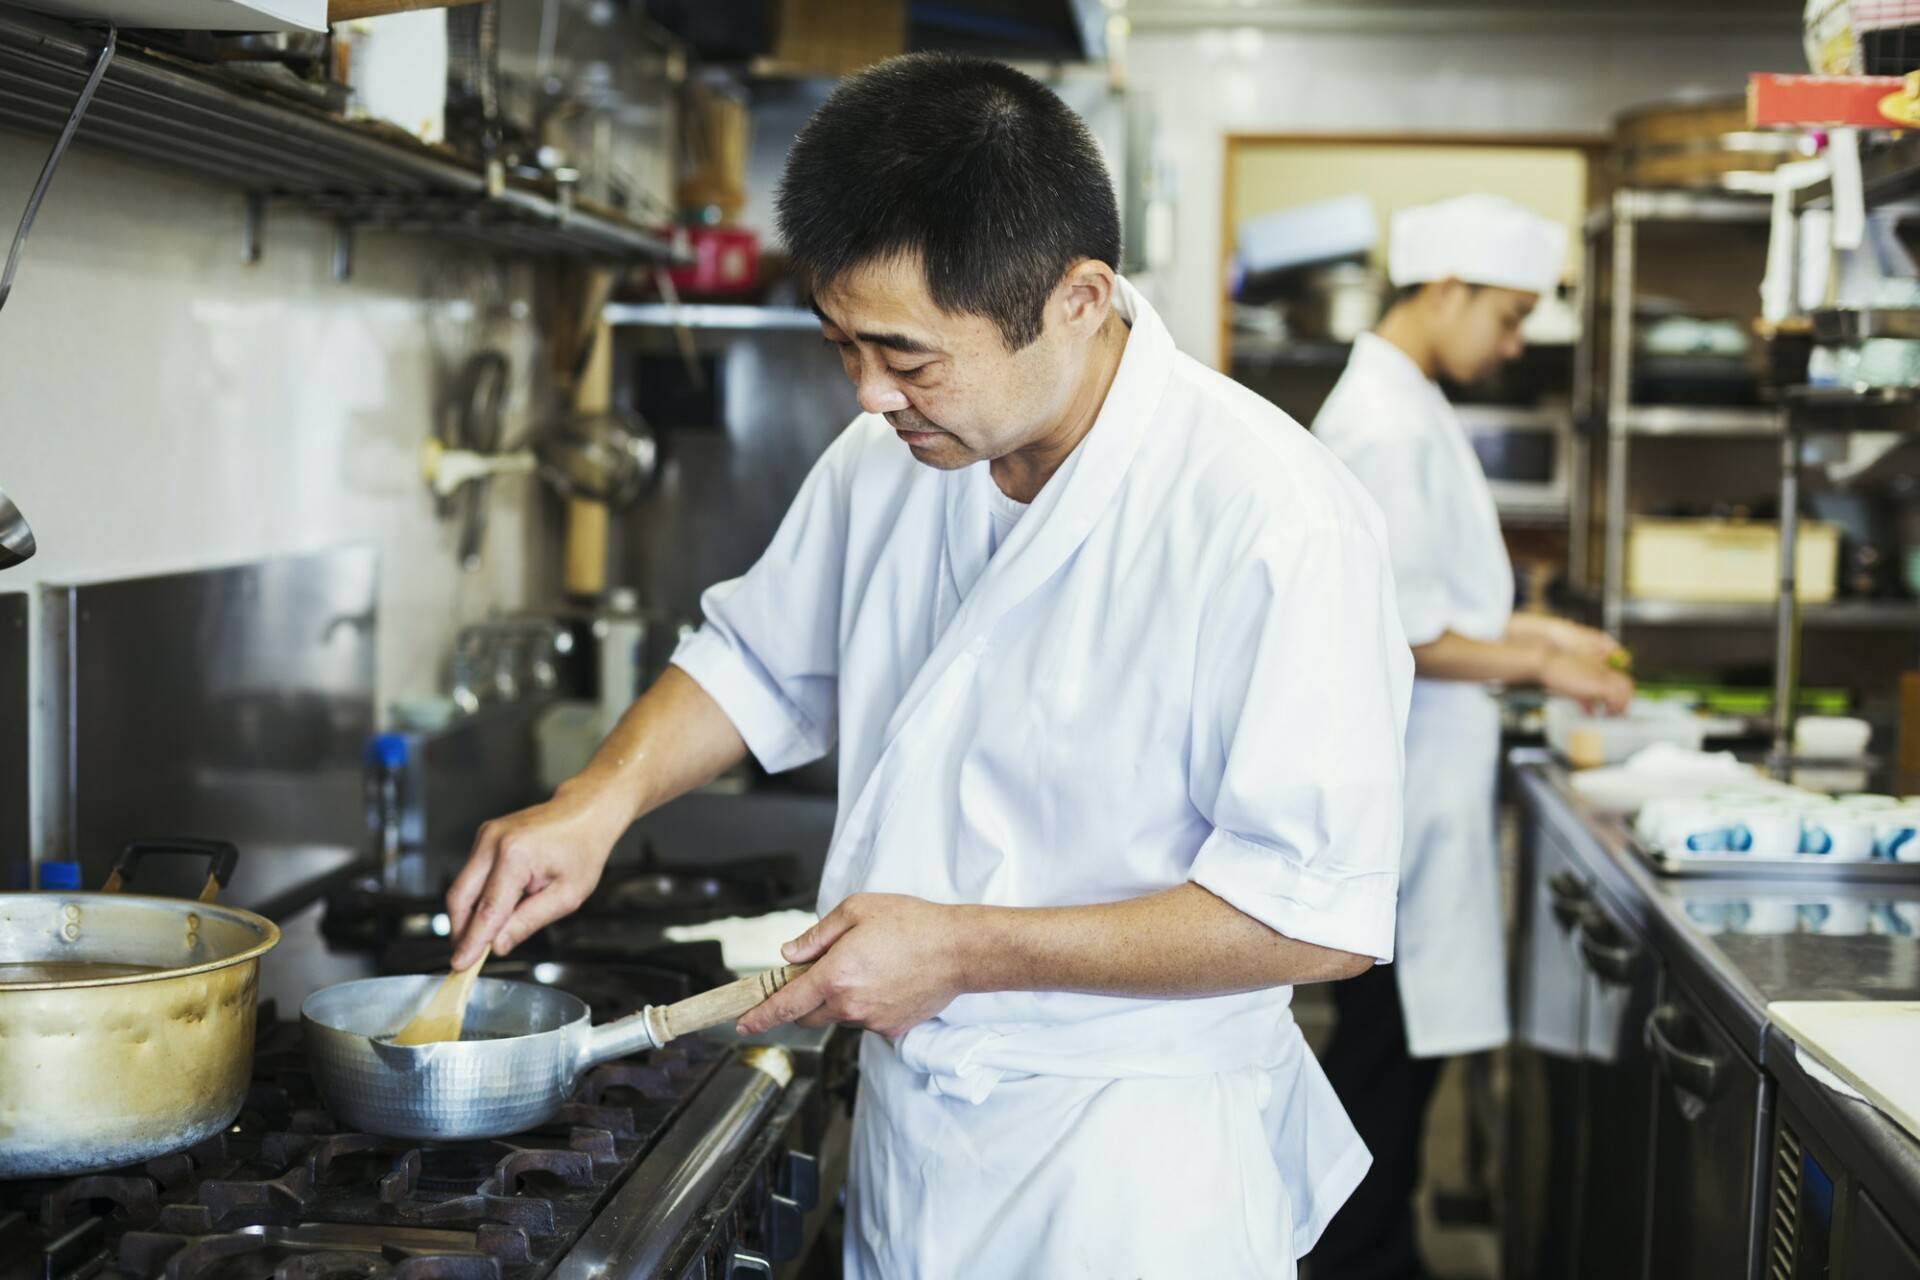 Chef working in the kitchen of a Japanese sushi restaurant, cooking on stove.